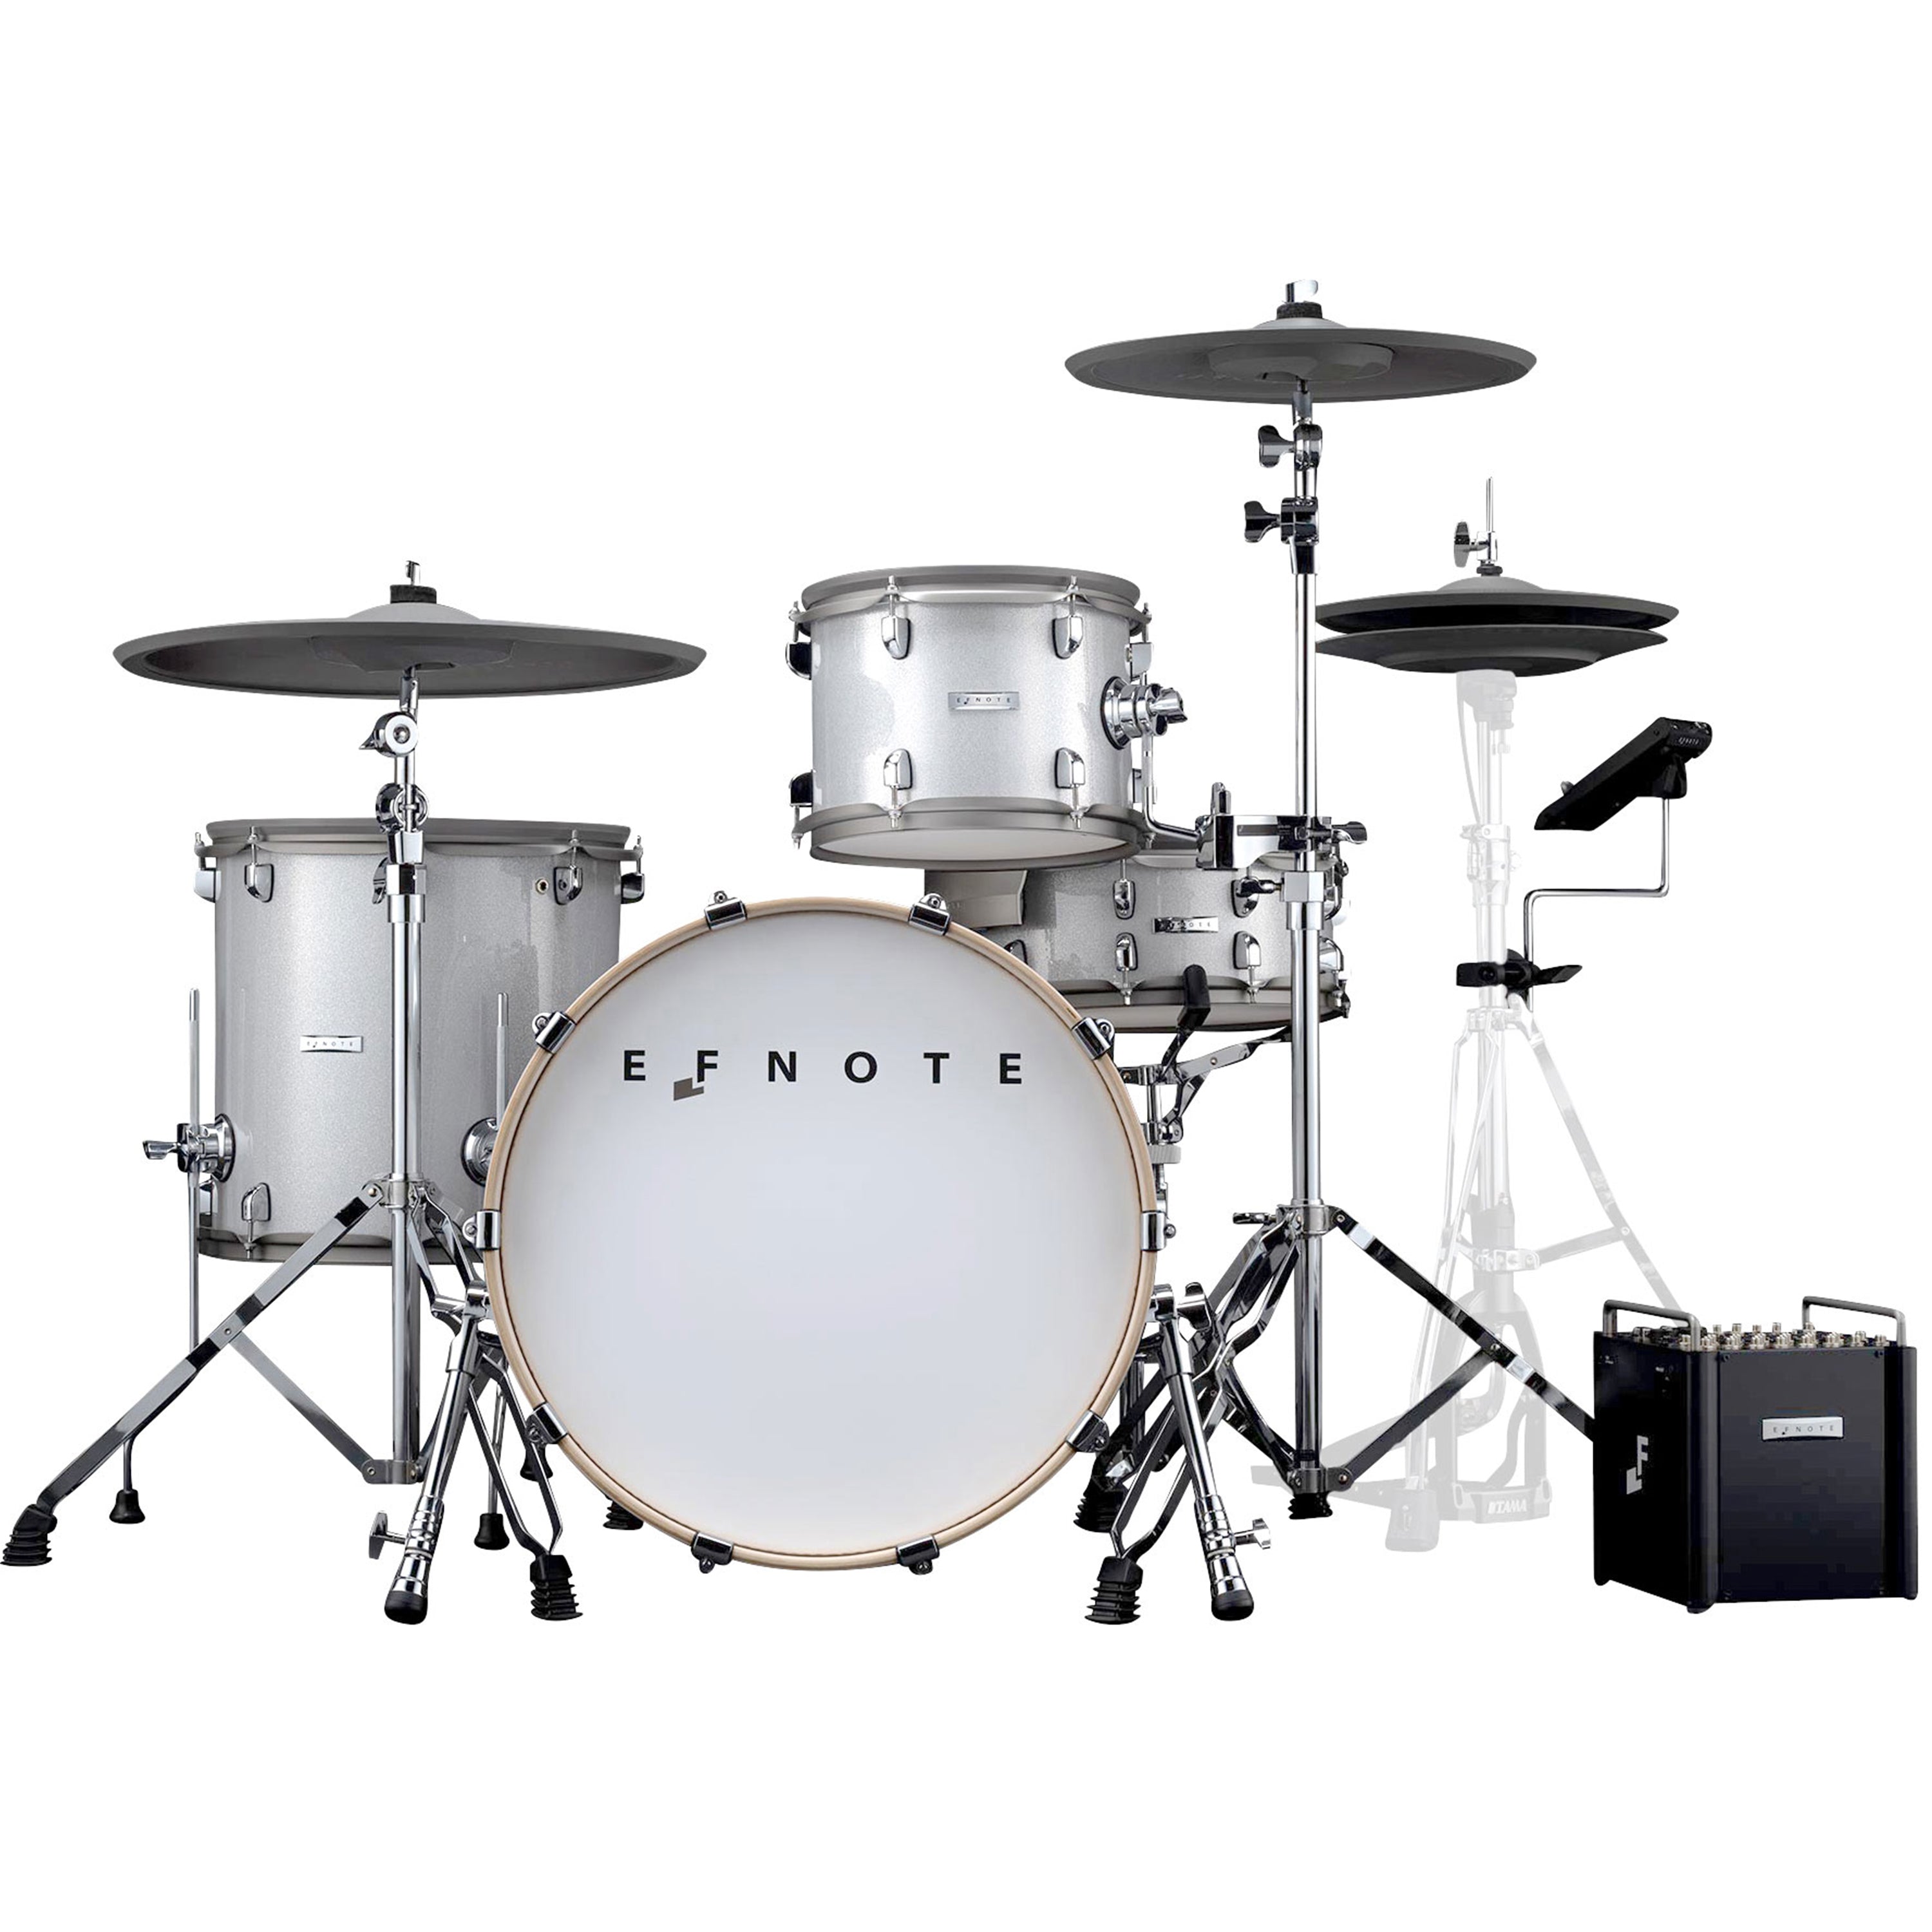 EFNOTE PRO 700 Standard Electronic Drum Kit - audience view